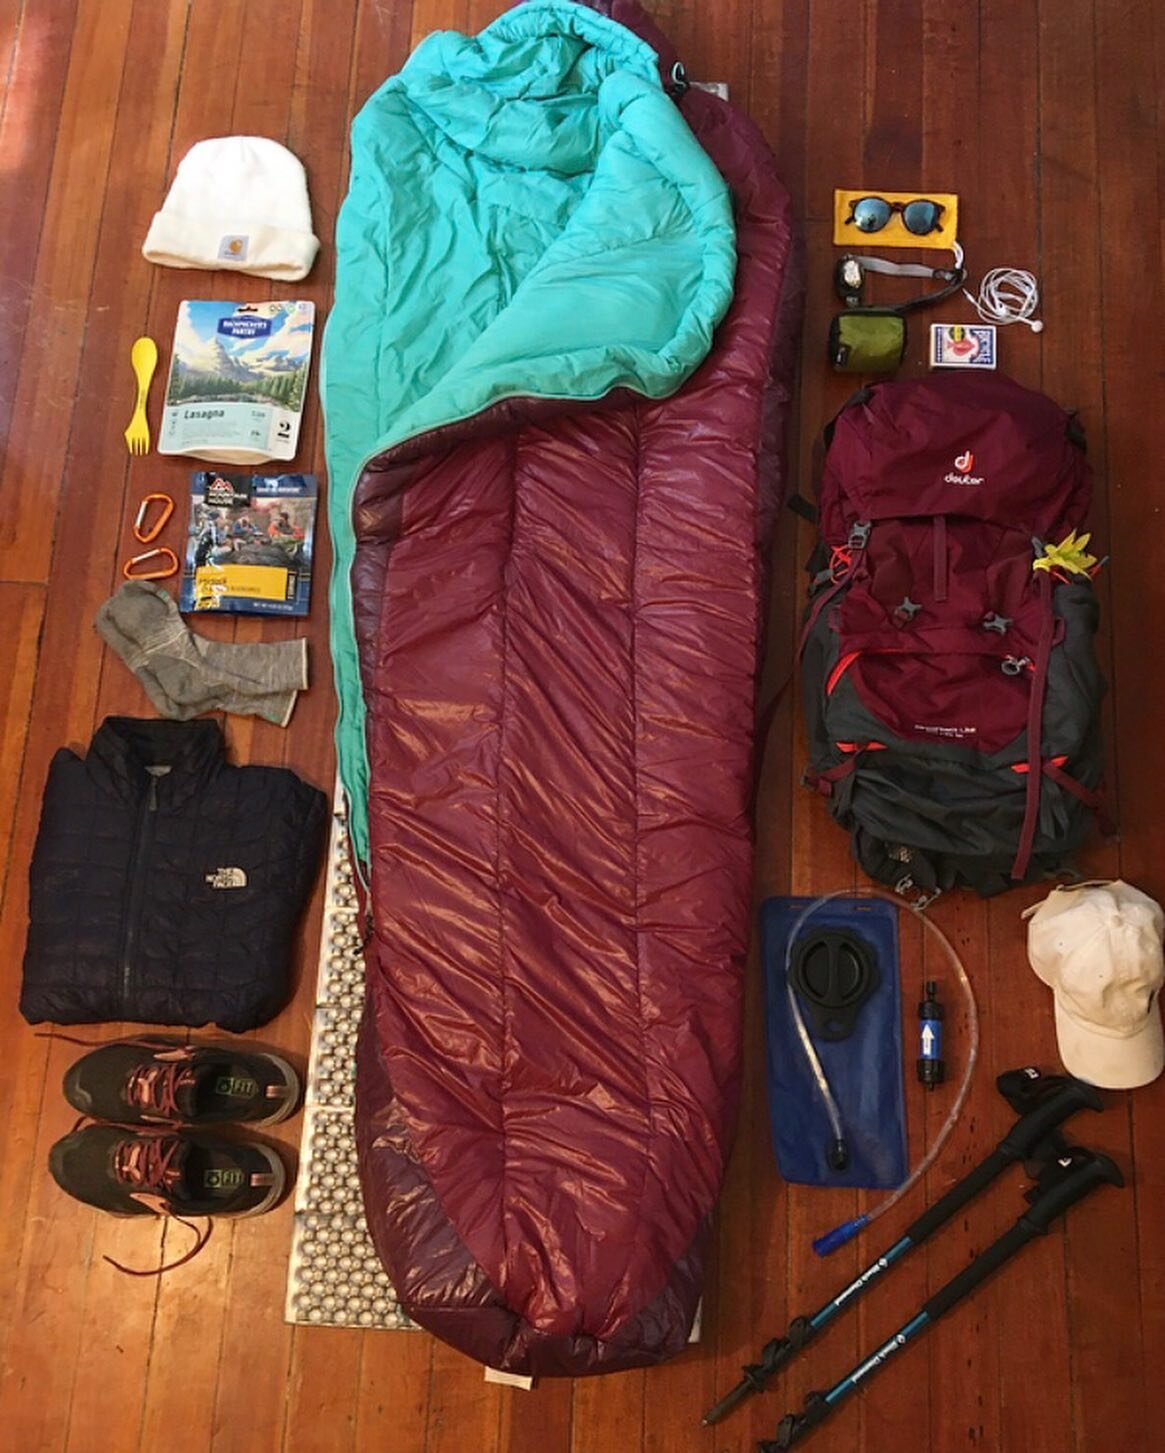 Our intern @aringen24 is off to Baxter State Park for her first backpacking trip! See how she prepared for the trip in her article &quot;Putting the &quot;Packing&quot; in Backpacking: How I Prepared for My First Backpacking Trip&quot; and swipe to s